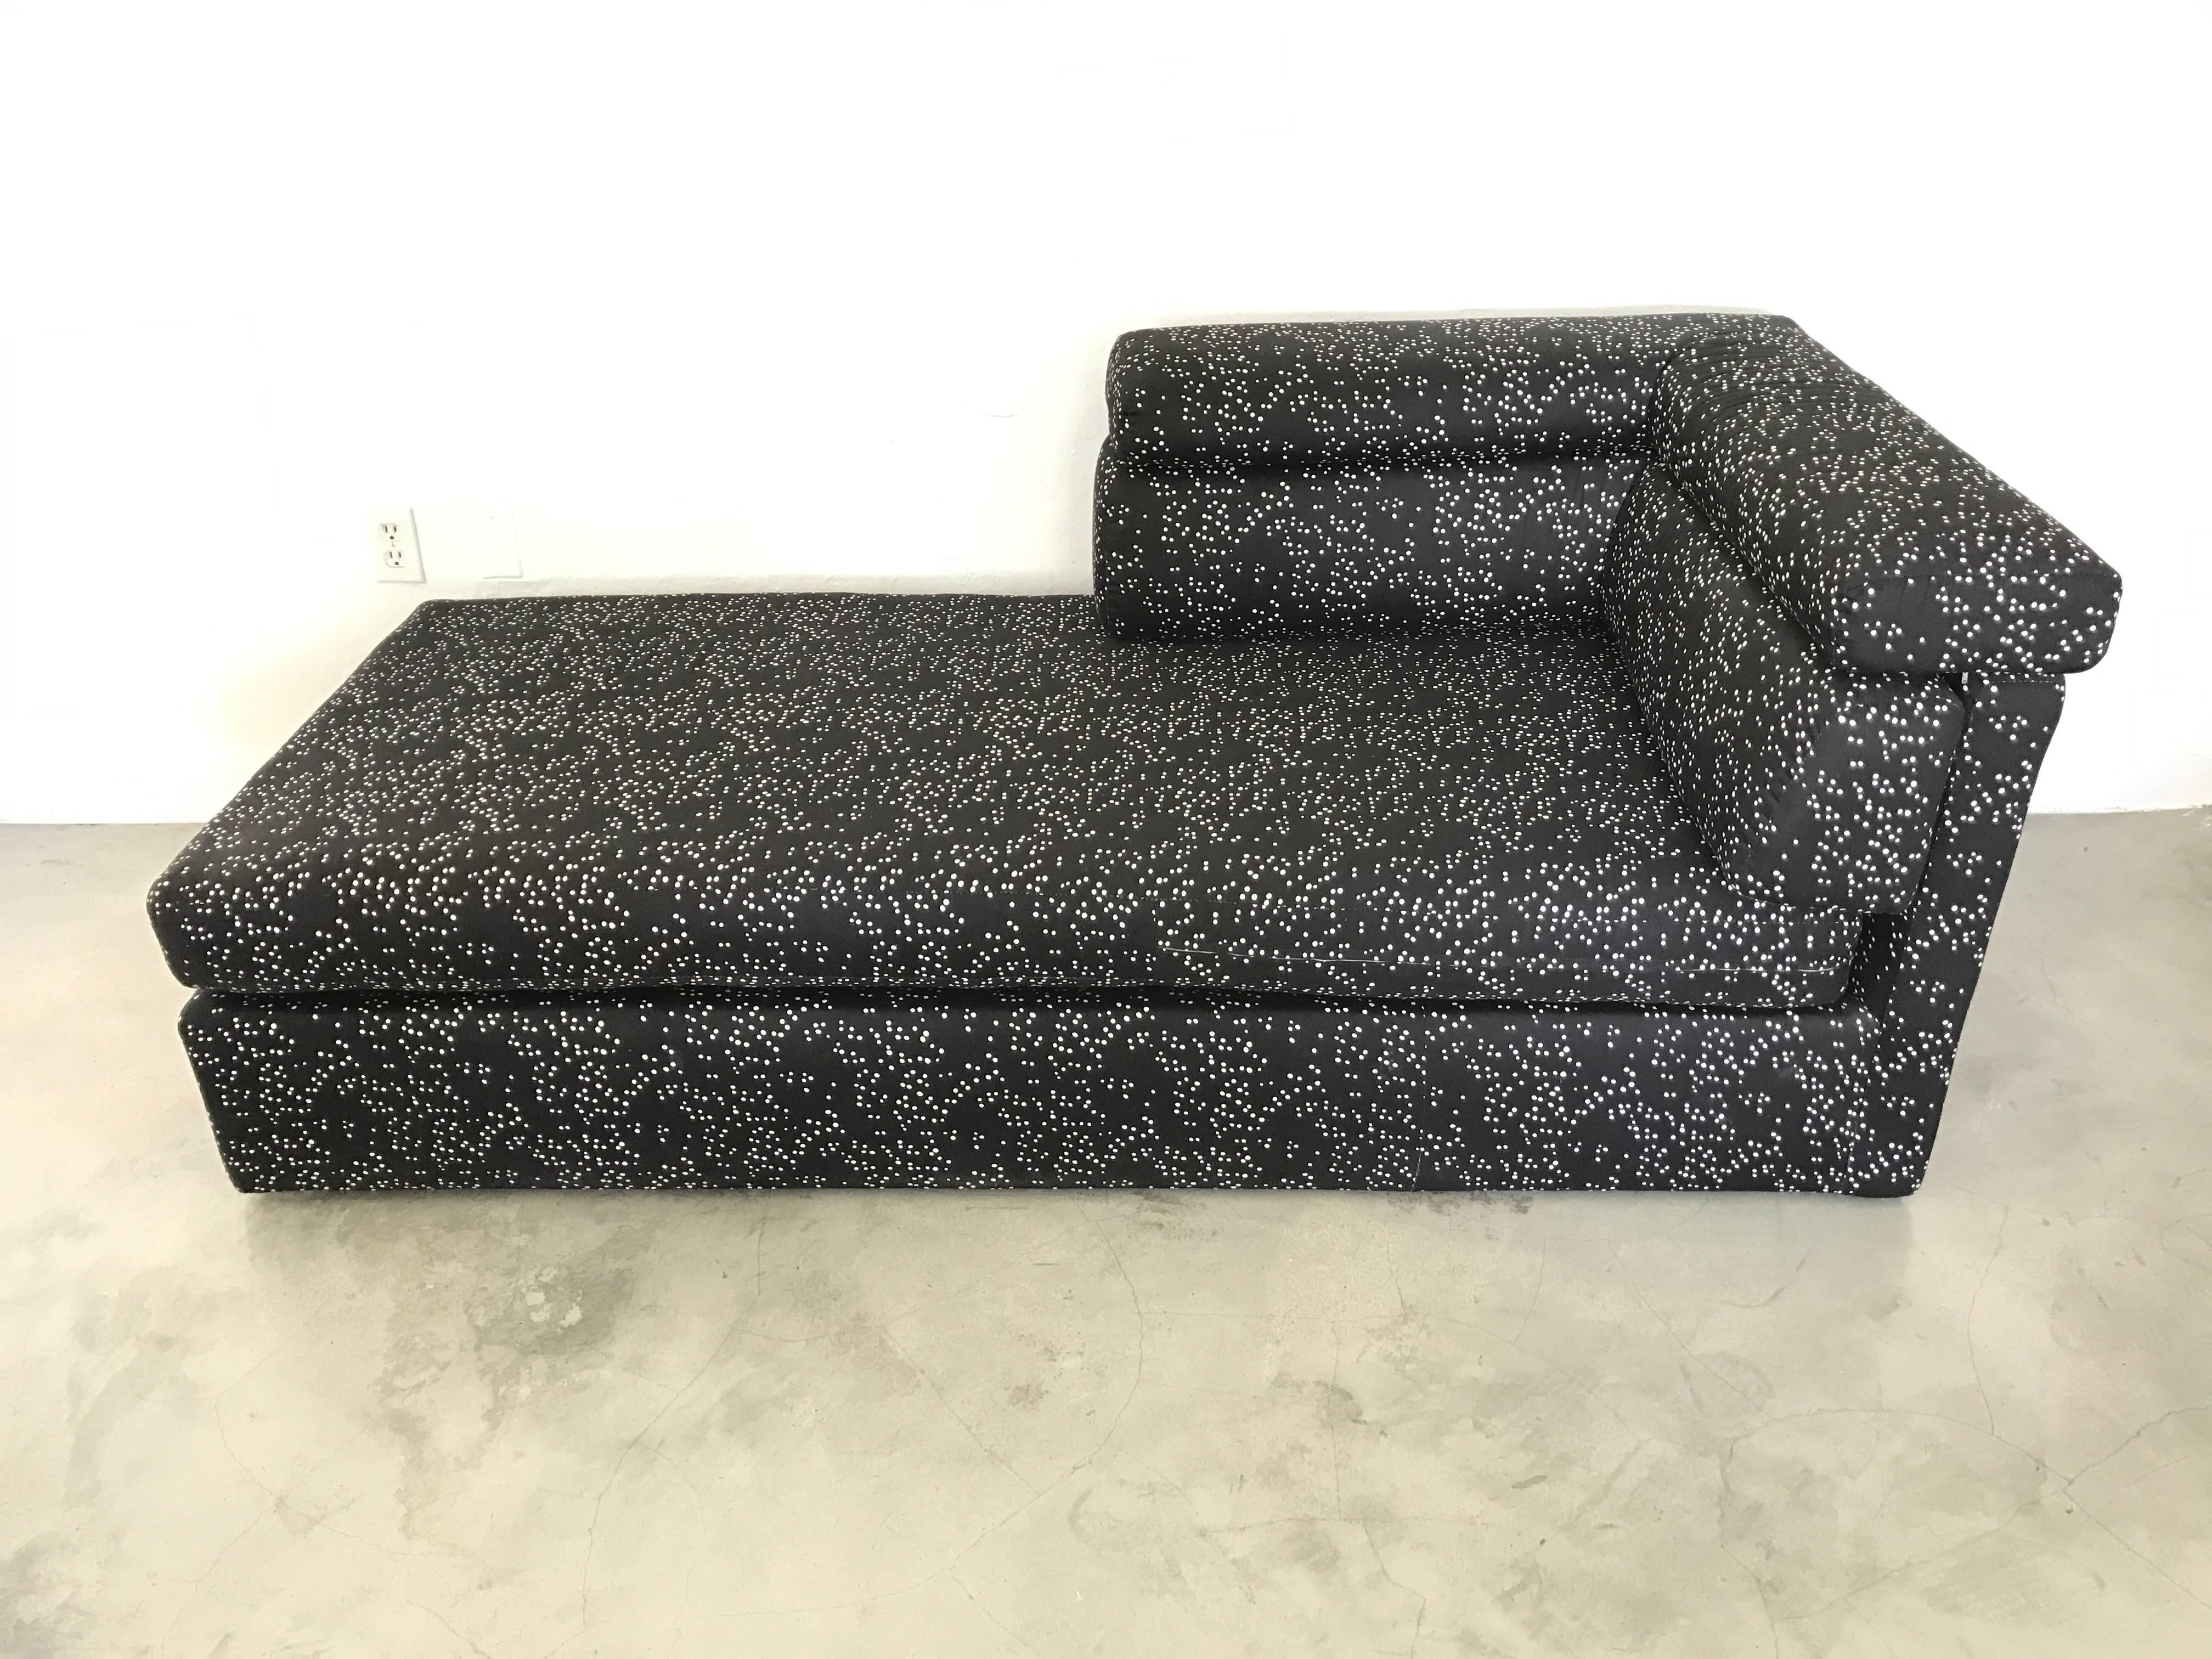 Custom black and white daybed chaise lounge sofa with pullout mattress by Milo Baughman for Thayer Coggin. 

Mattress size: 60 inch x 70 inch.